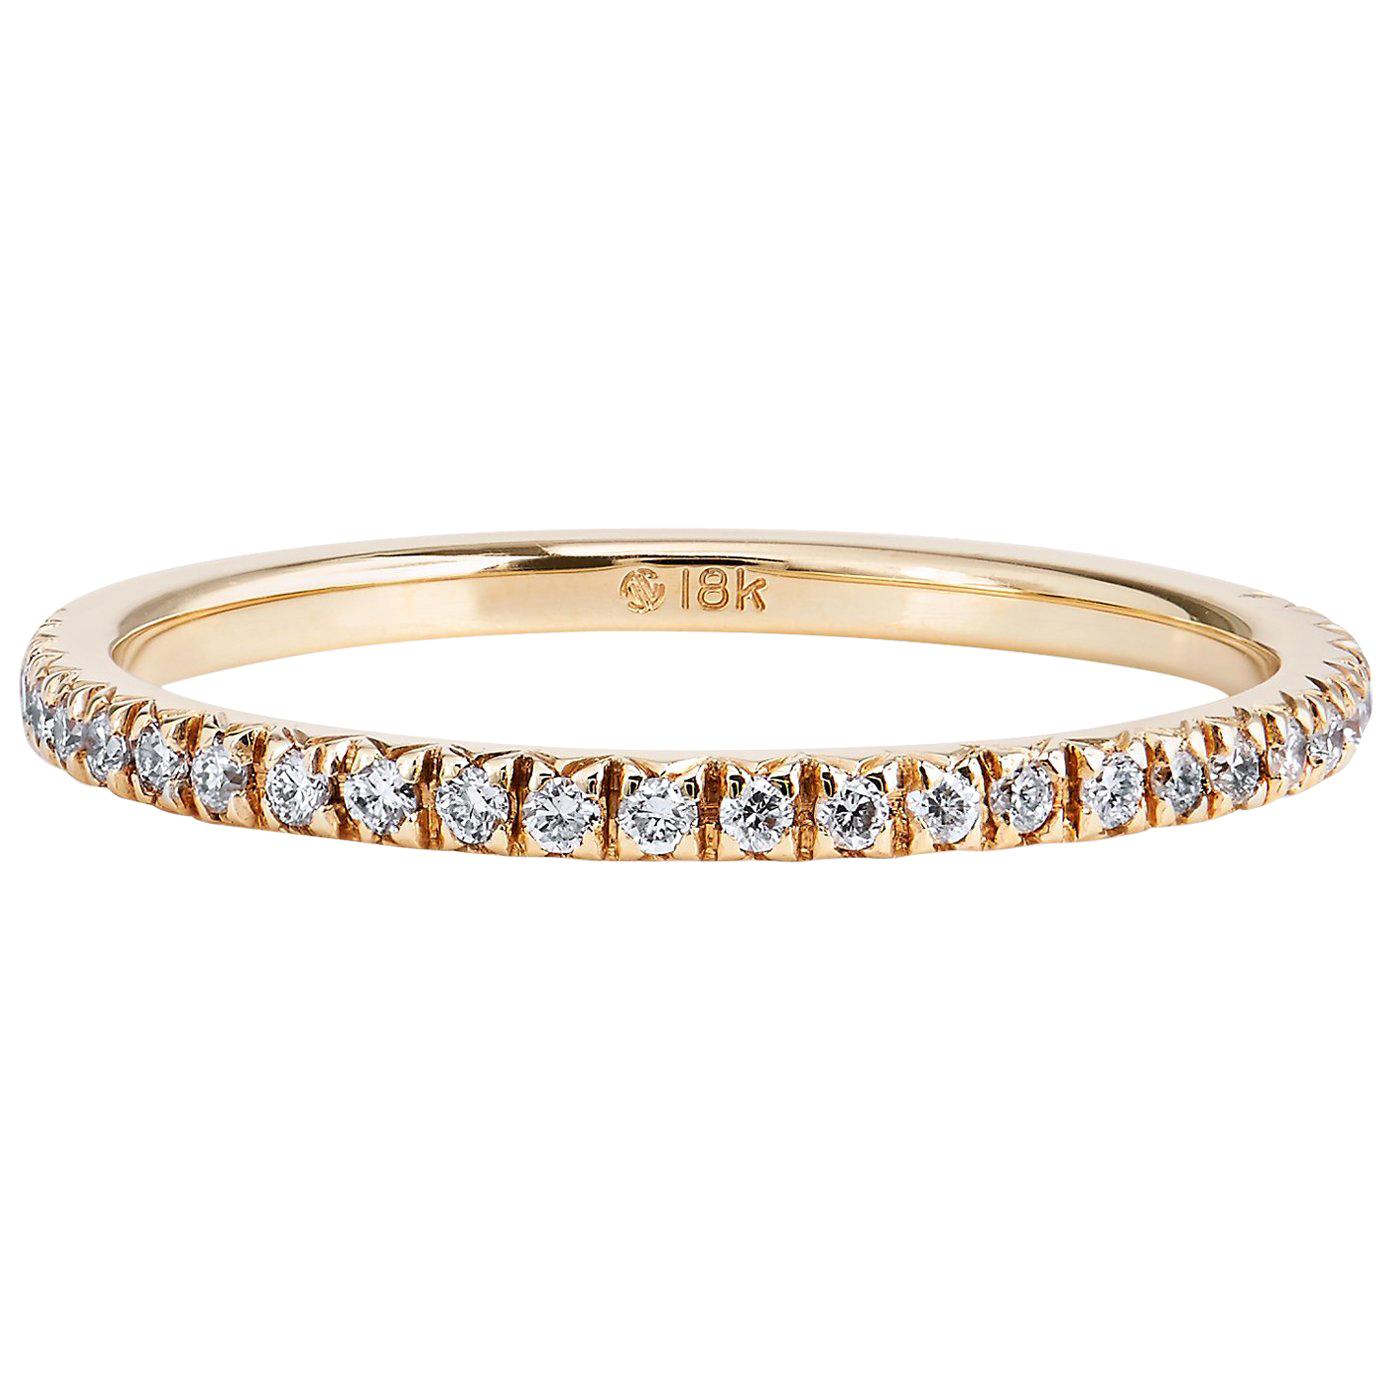 18 Karat Yellow Gold Band Ring with 0.14 Carats Total Weight of Diamonds